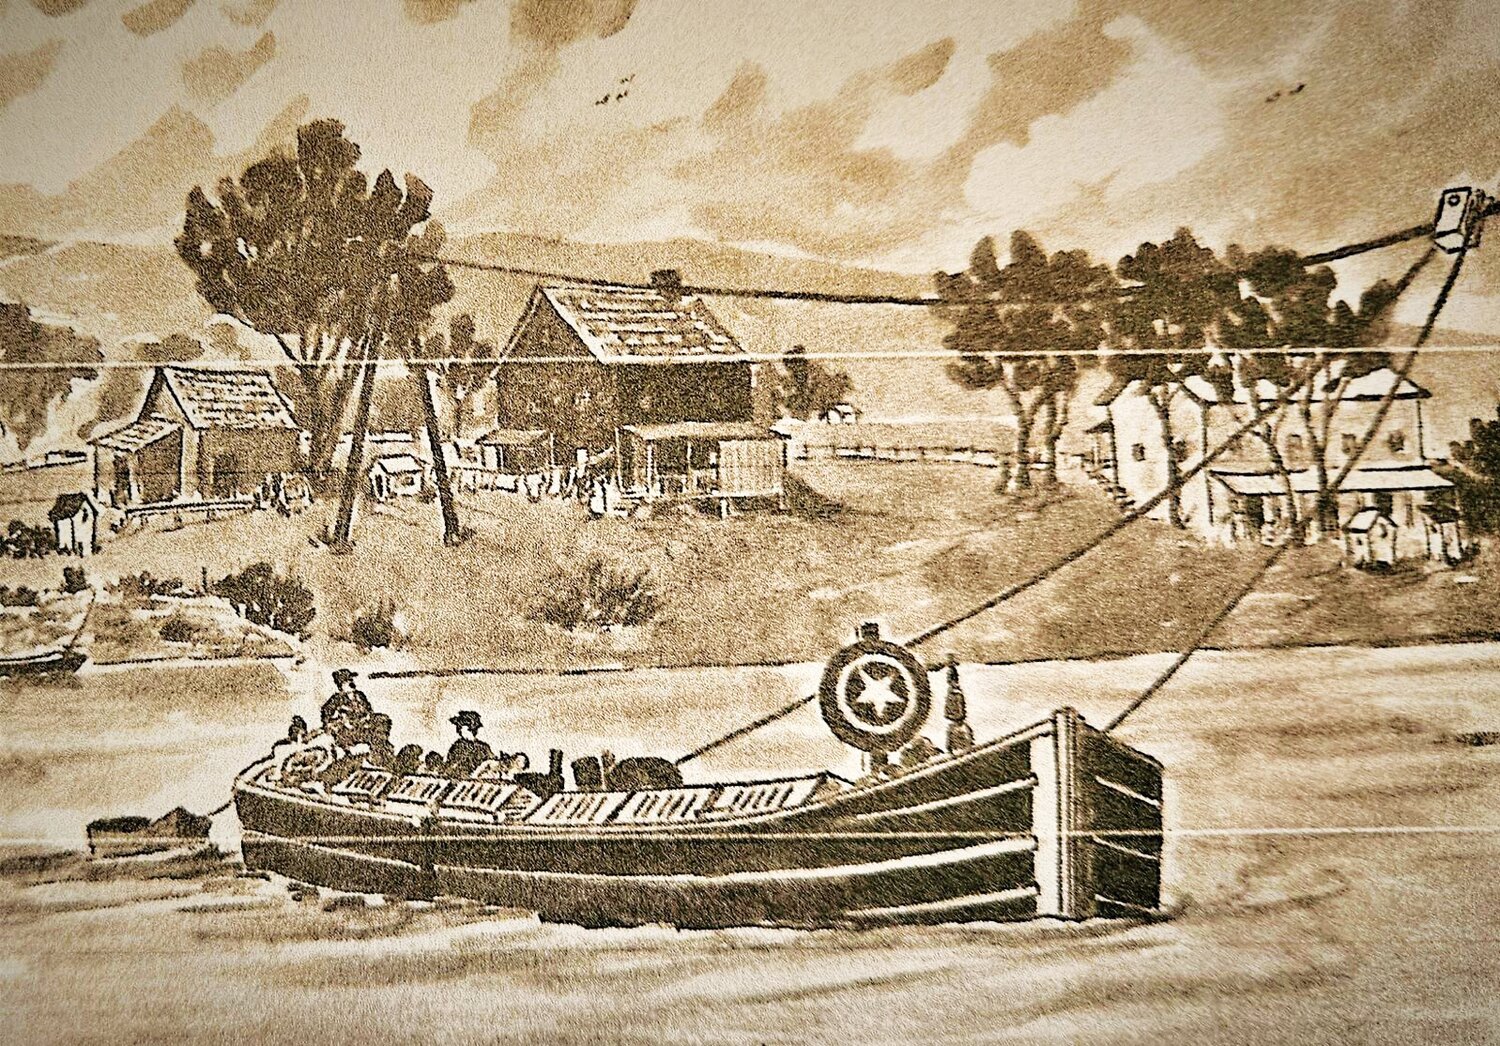 A boat is depicted making its way through the canal in New Hope.